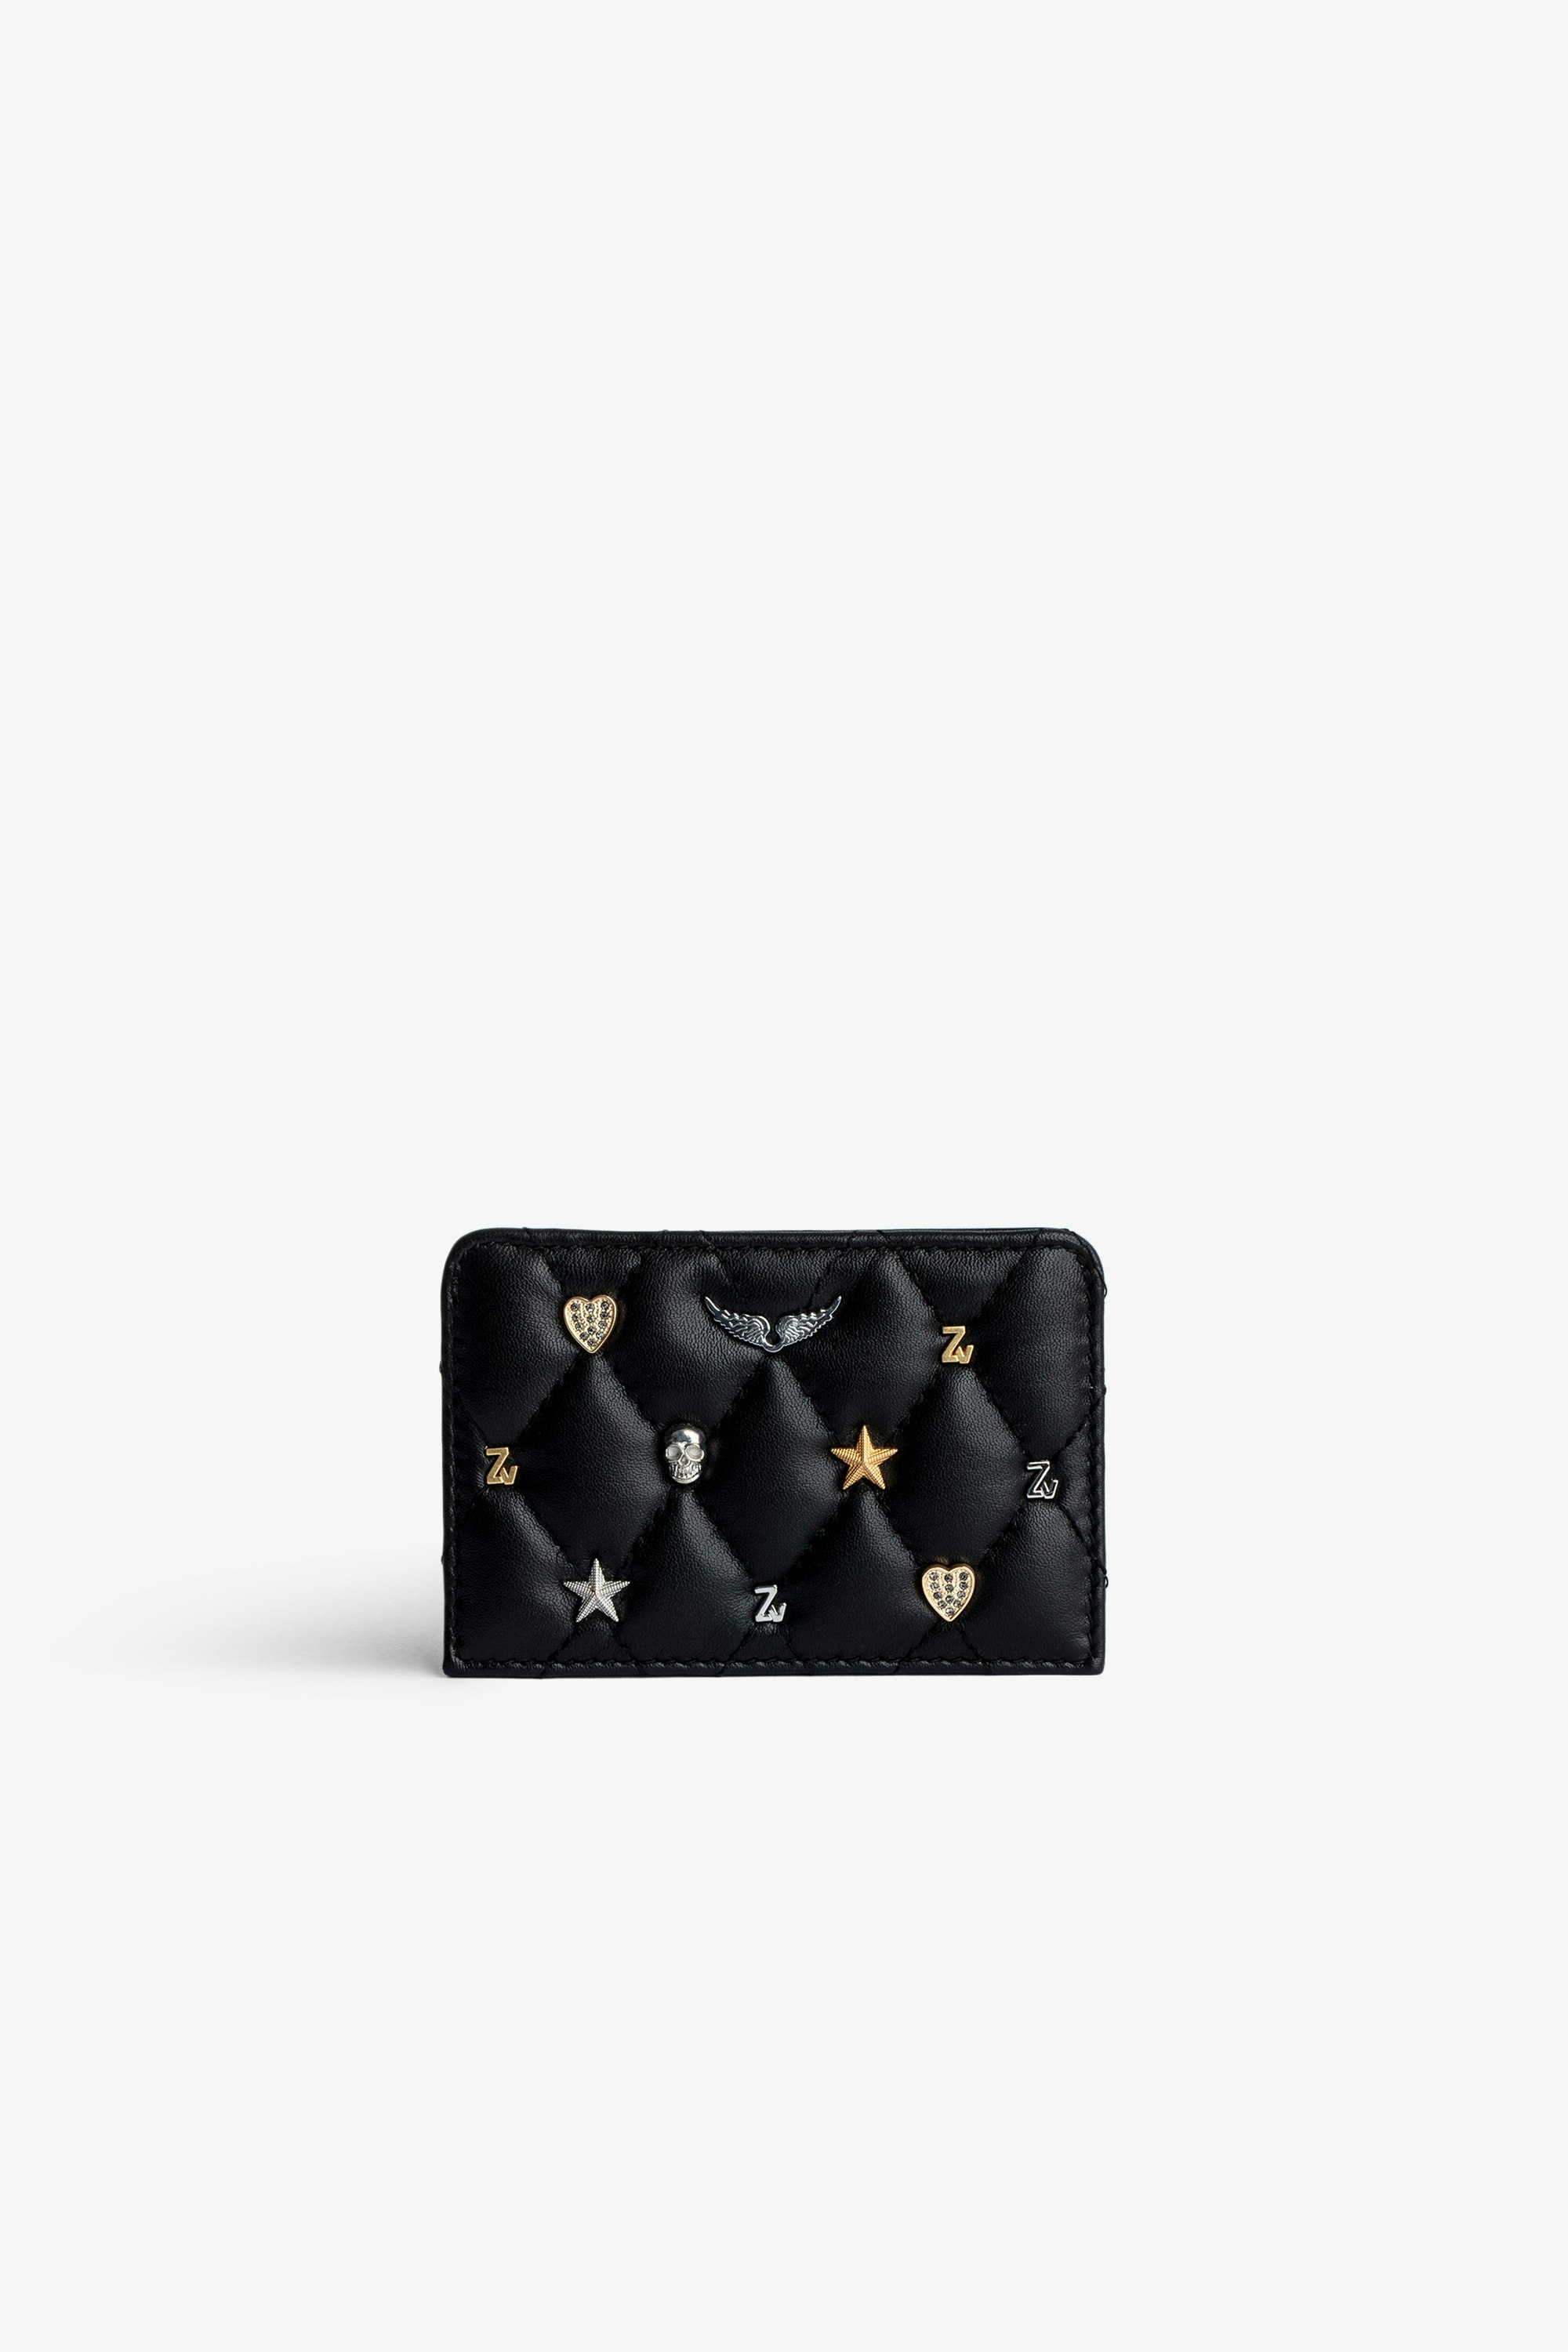 ZV Pass Card Holder - Women’s black quilted leather card holder with silver- and gold-tone charms